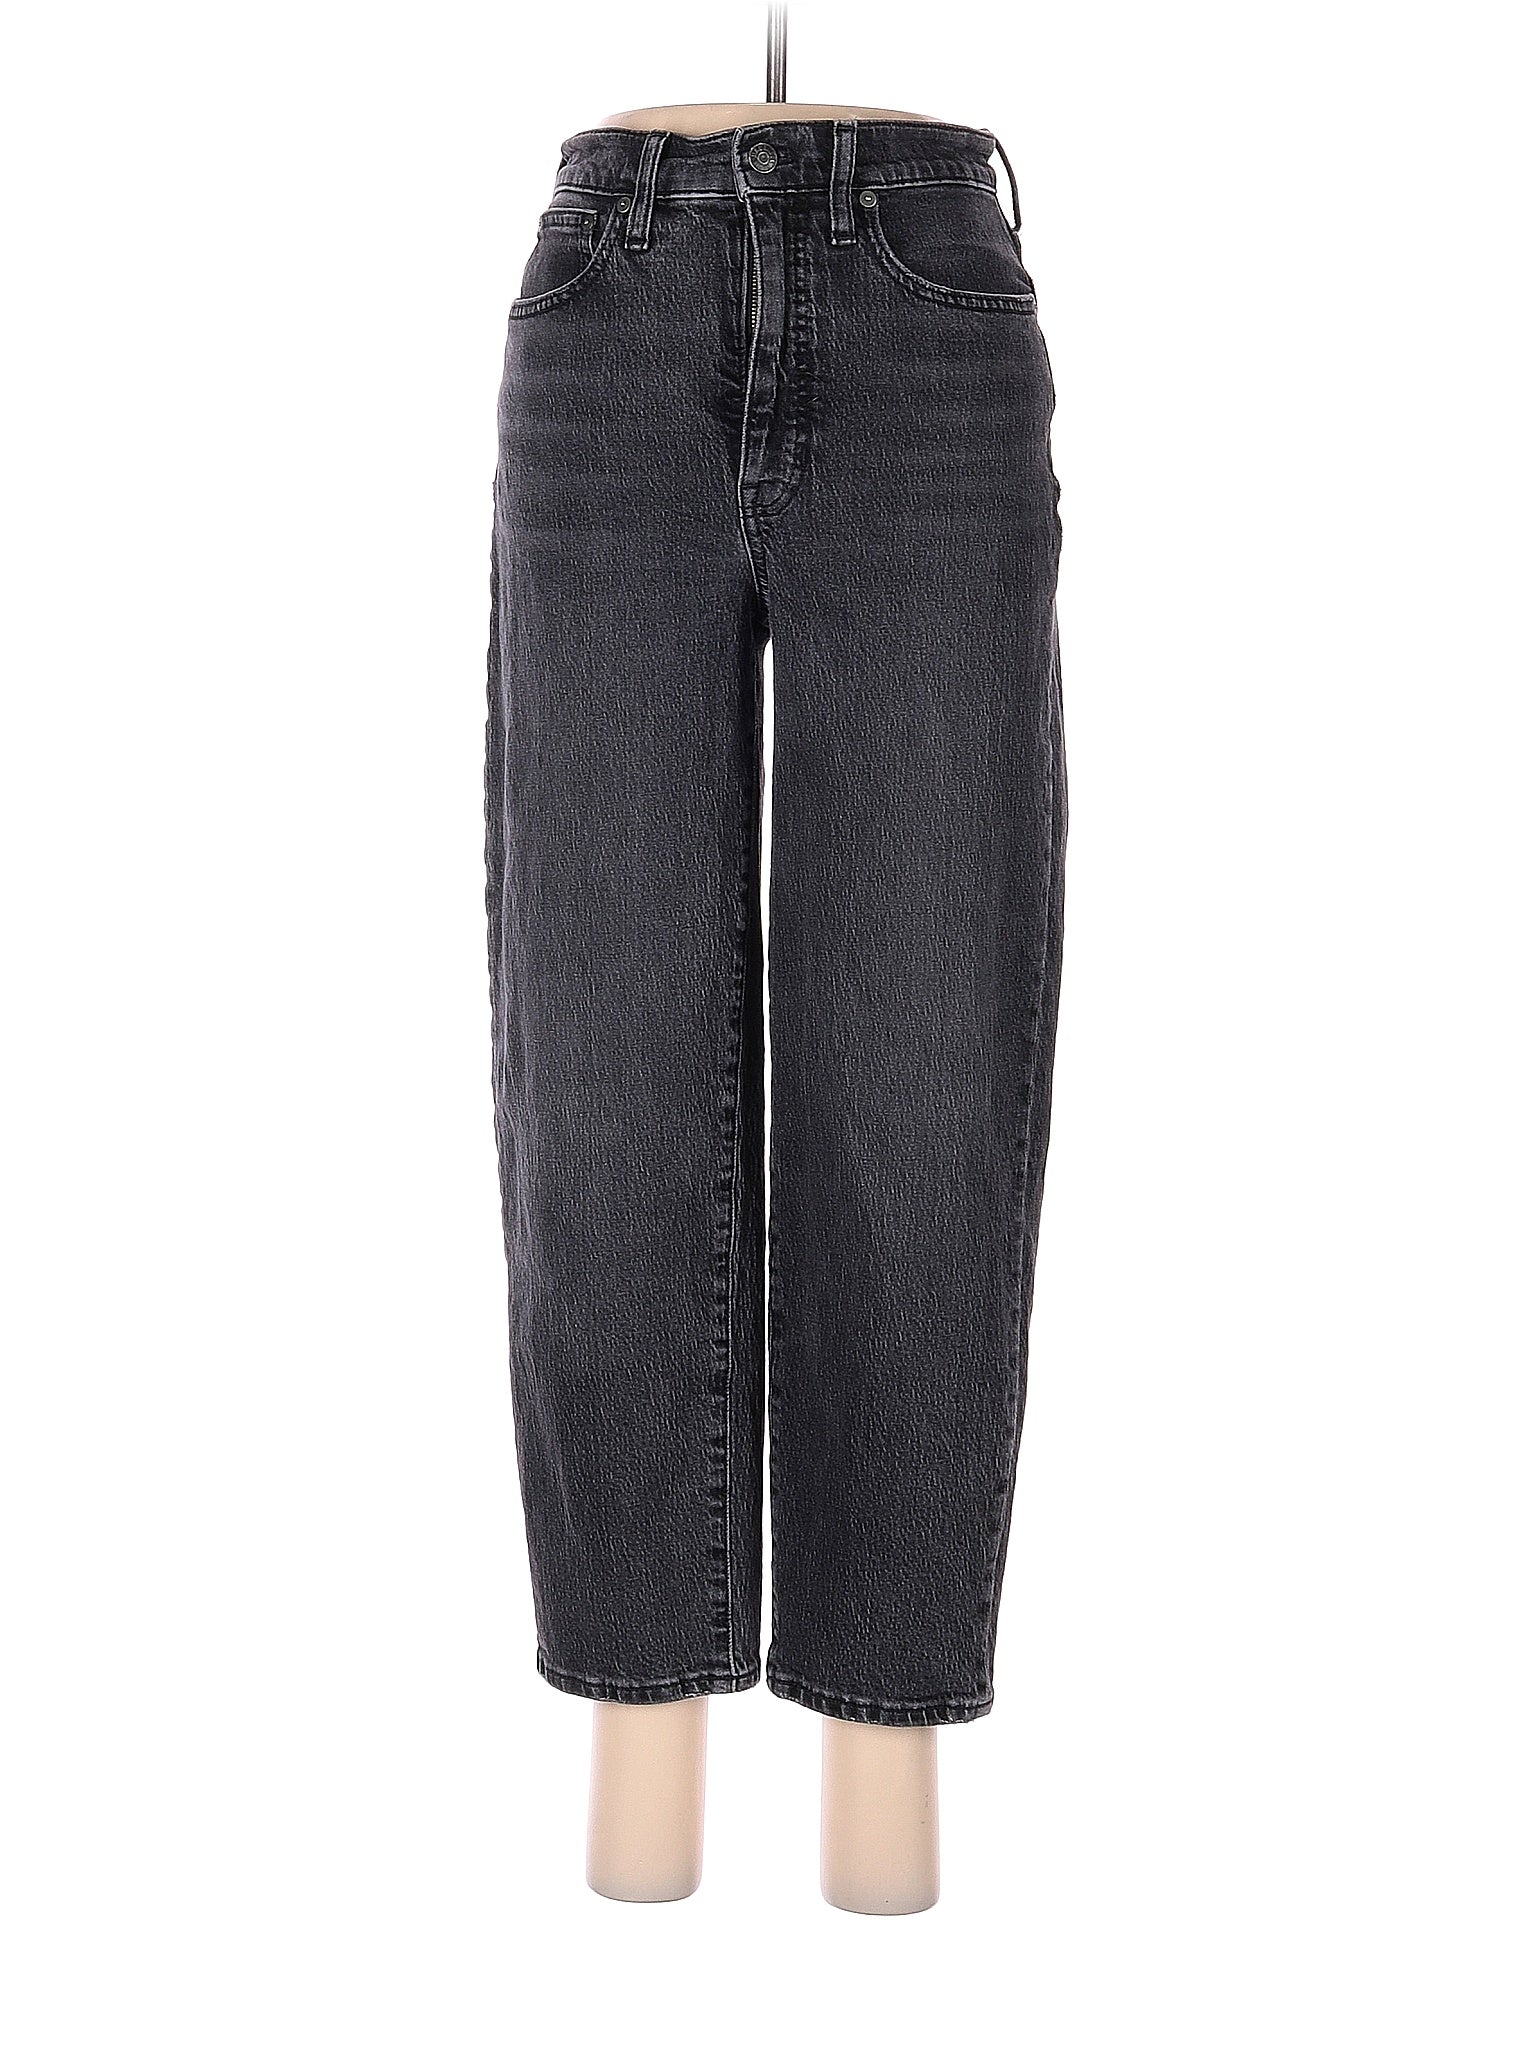 Mid-Rise Boyjeans Madewell Jeans 26 in Dark Wash waist size - 26